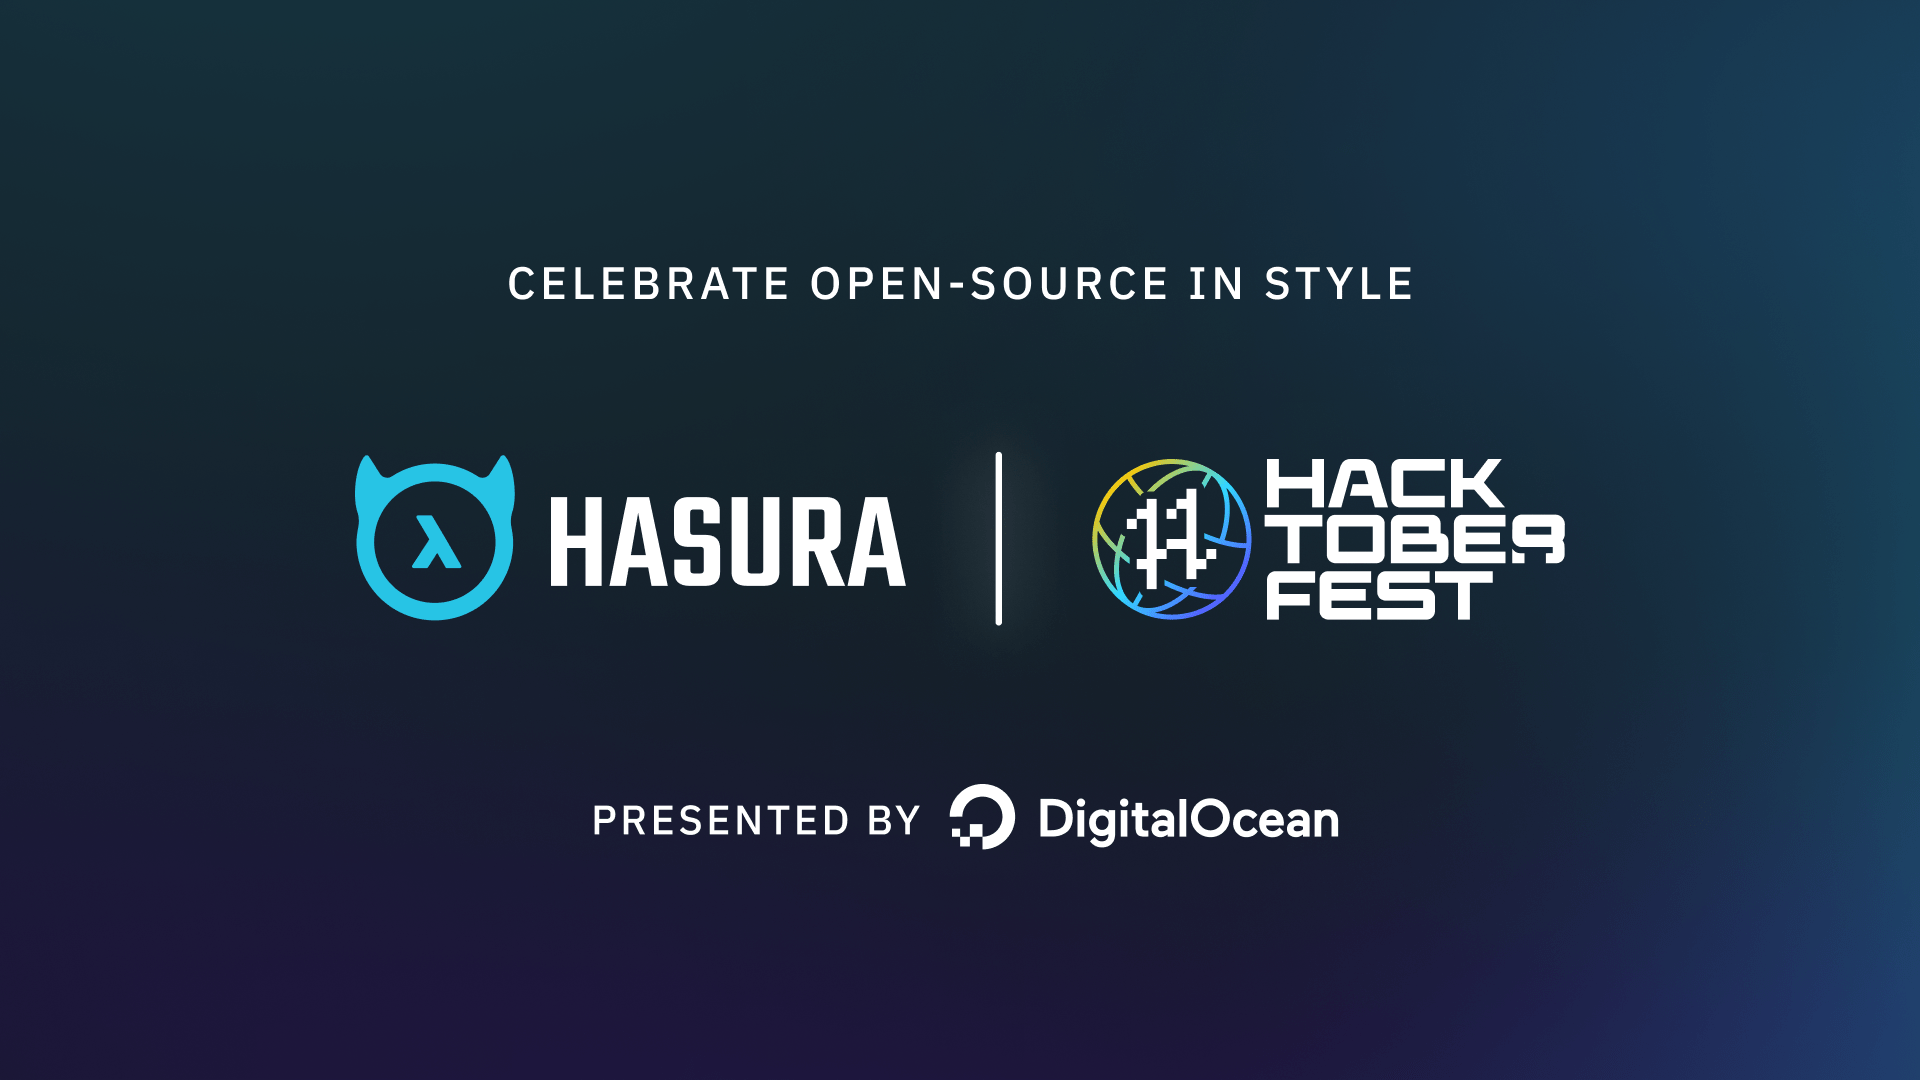 With Hasura, celebrate open-source in style with Hacktoberfest!